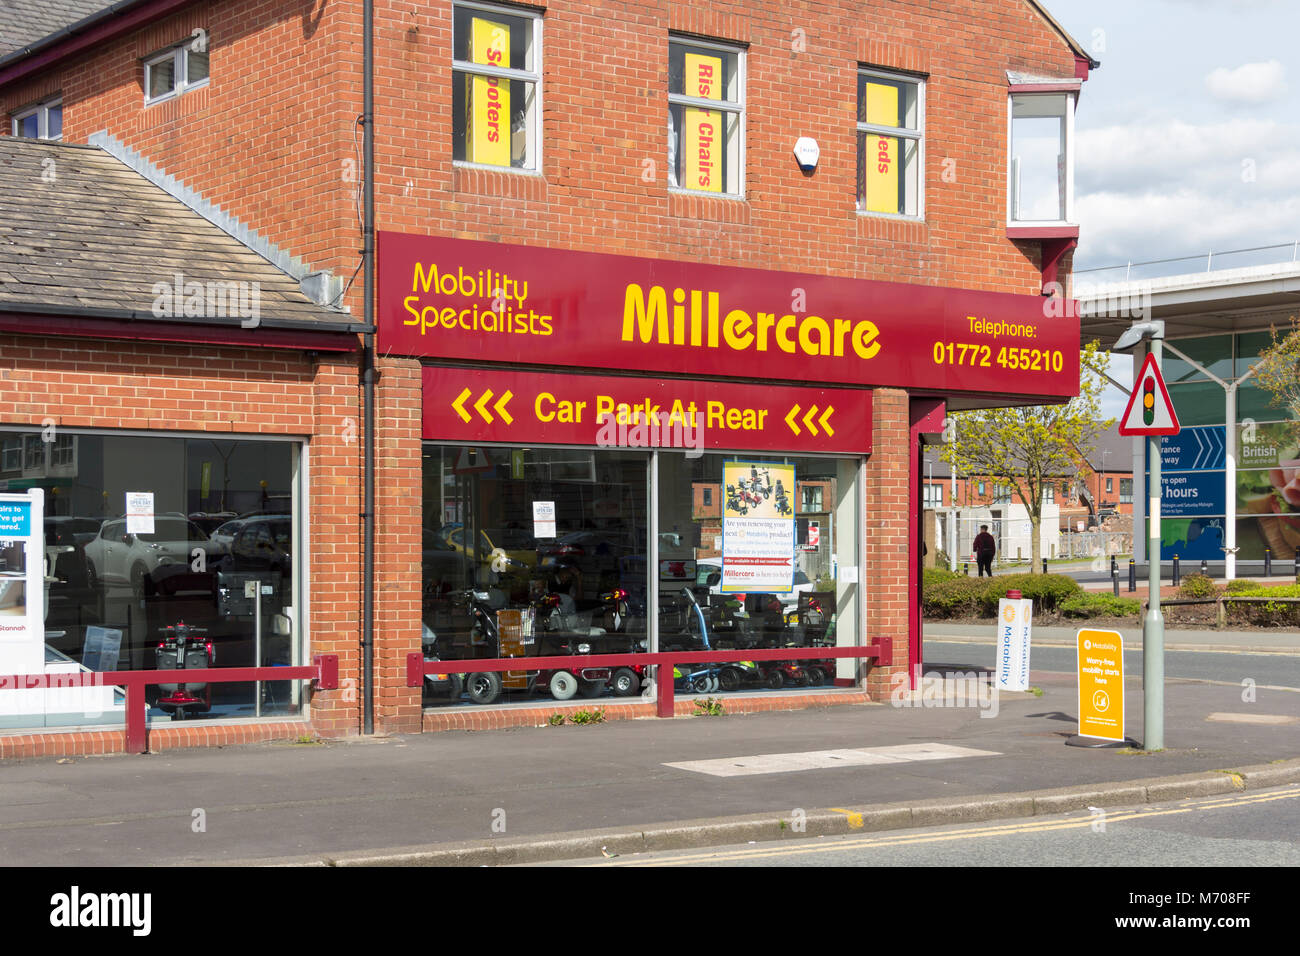 Millercare mobillity and healthcare equipment specialist shop, Towngate, Leyland, Lancashire. Milercare are Motability agents. Stock Photo